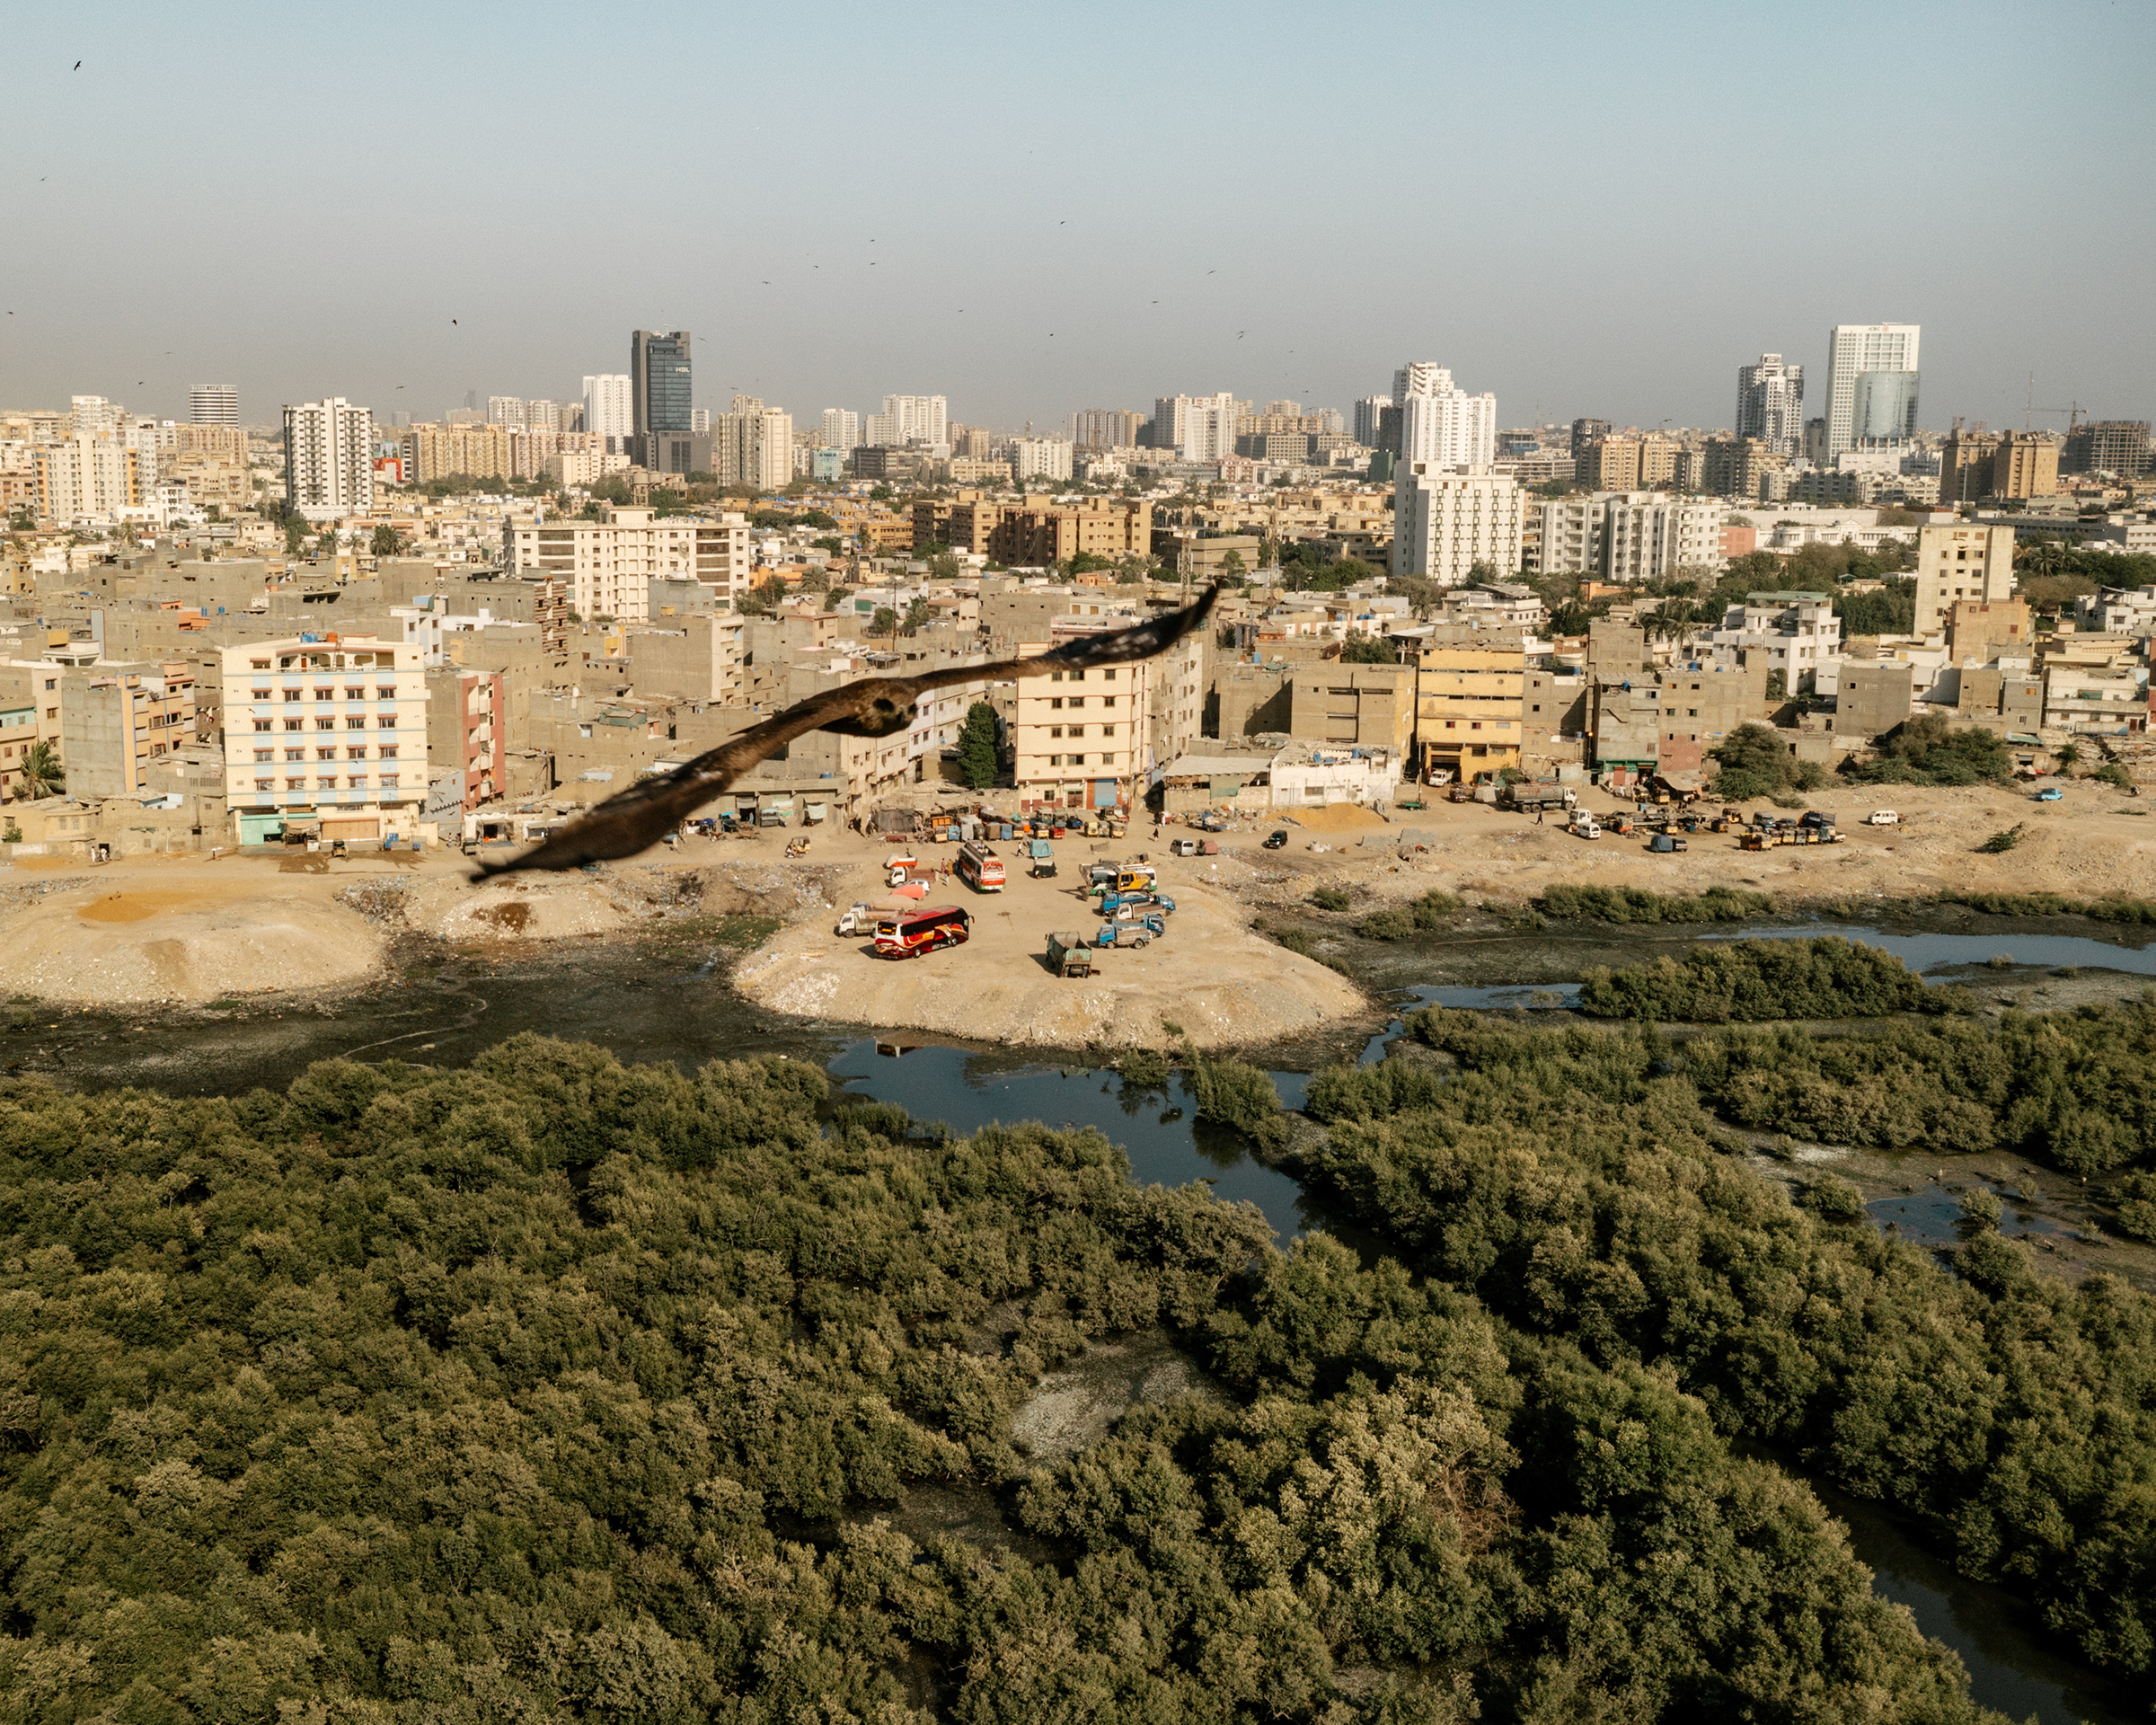 In Karachi, development is encroaching on mangroves, which have long protected the city from the impacts of climate change (Matthieu Paley for TIME)